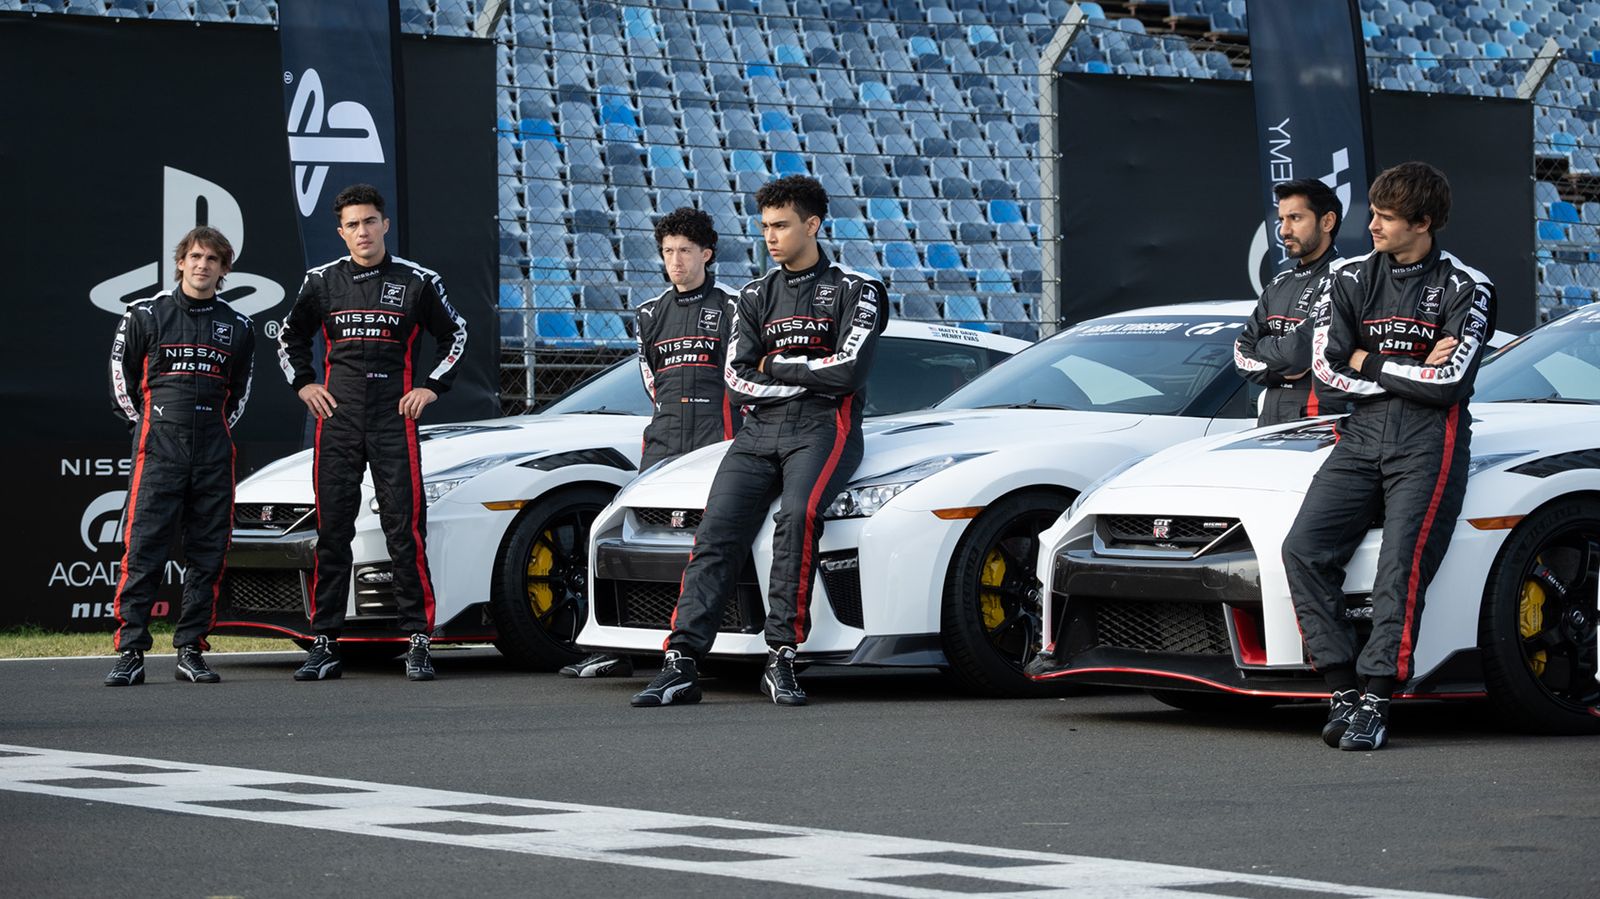 The Gran Turismo Movie is Getting Slated by Critics